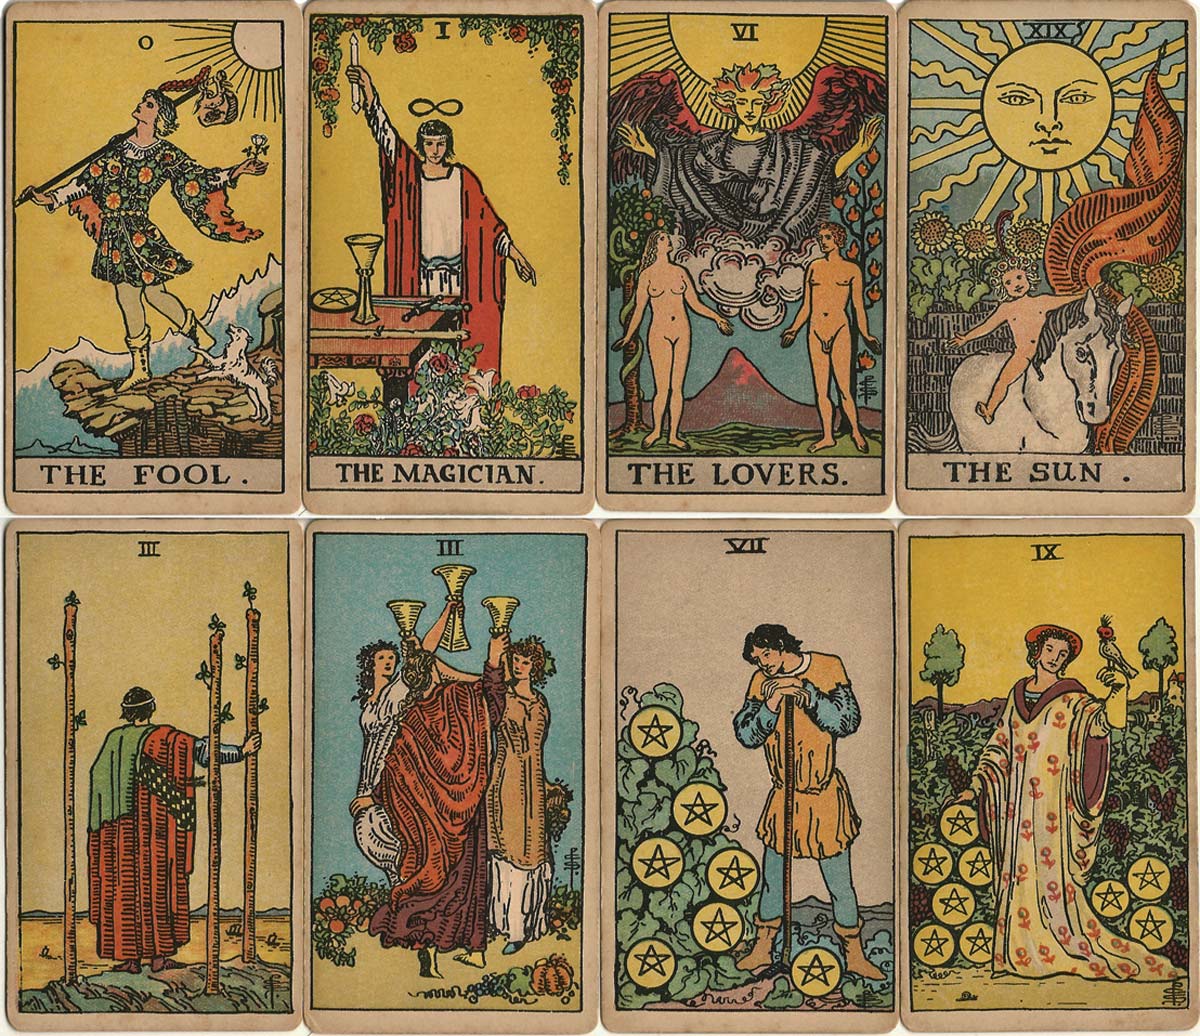 1st edition of the Rider-Waite tarot designed by Pamela Colman Smith and first published by William Rider & Son Limited in December 1909